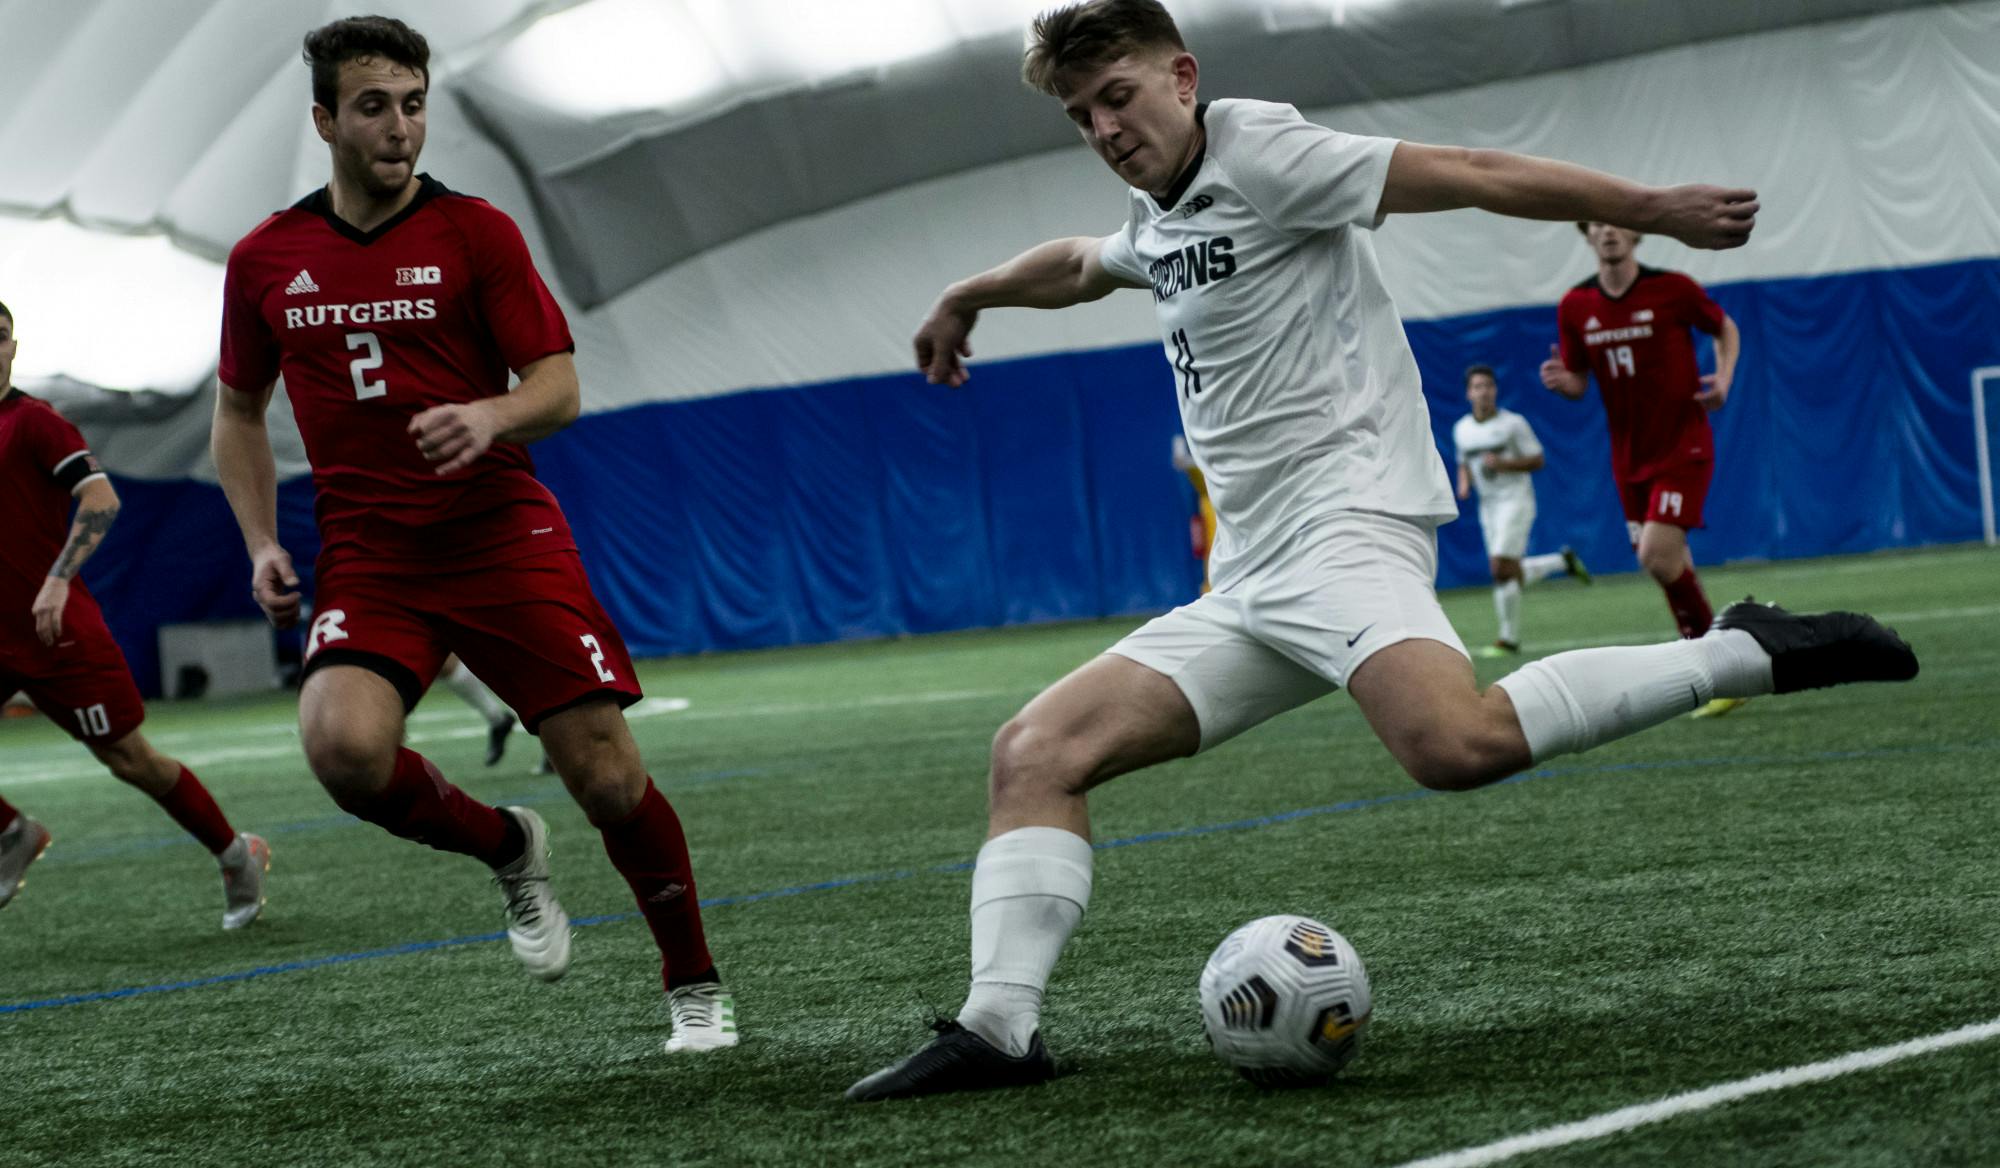 <p>Sophomore forward Gianni Ferri shoots the ball during the game against Rutgers on Feb. 19, at the St. Joe&#x27;s Sports Dome. The Spartans lost to the Scarlet Nights 0-2.</p>